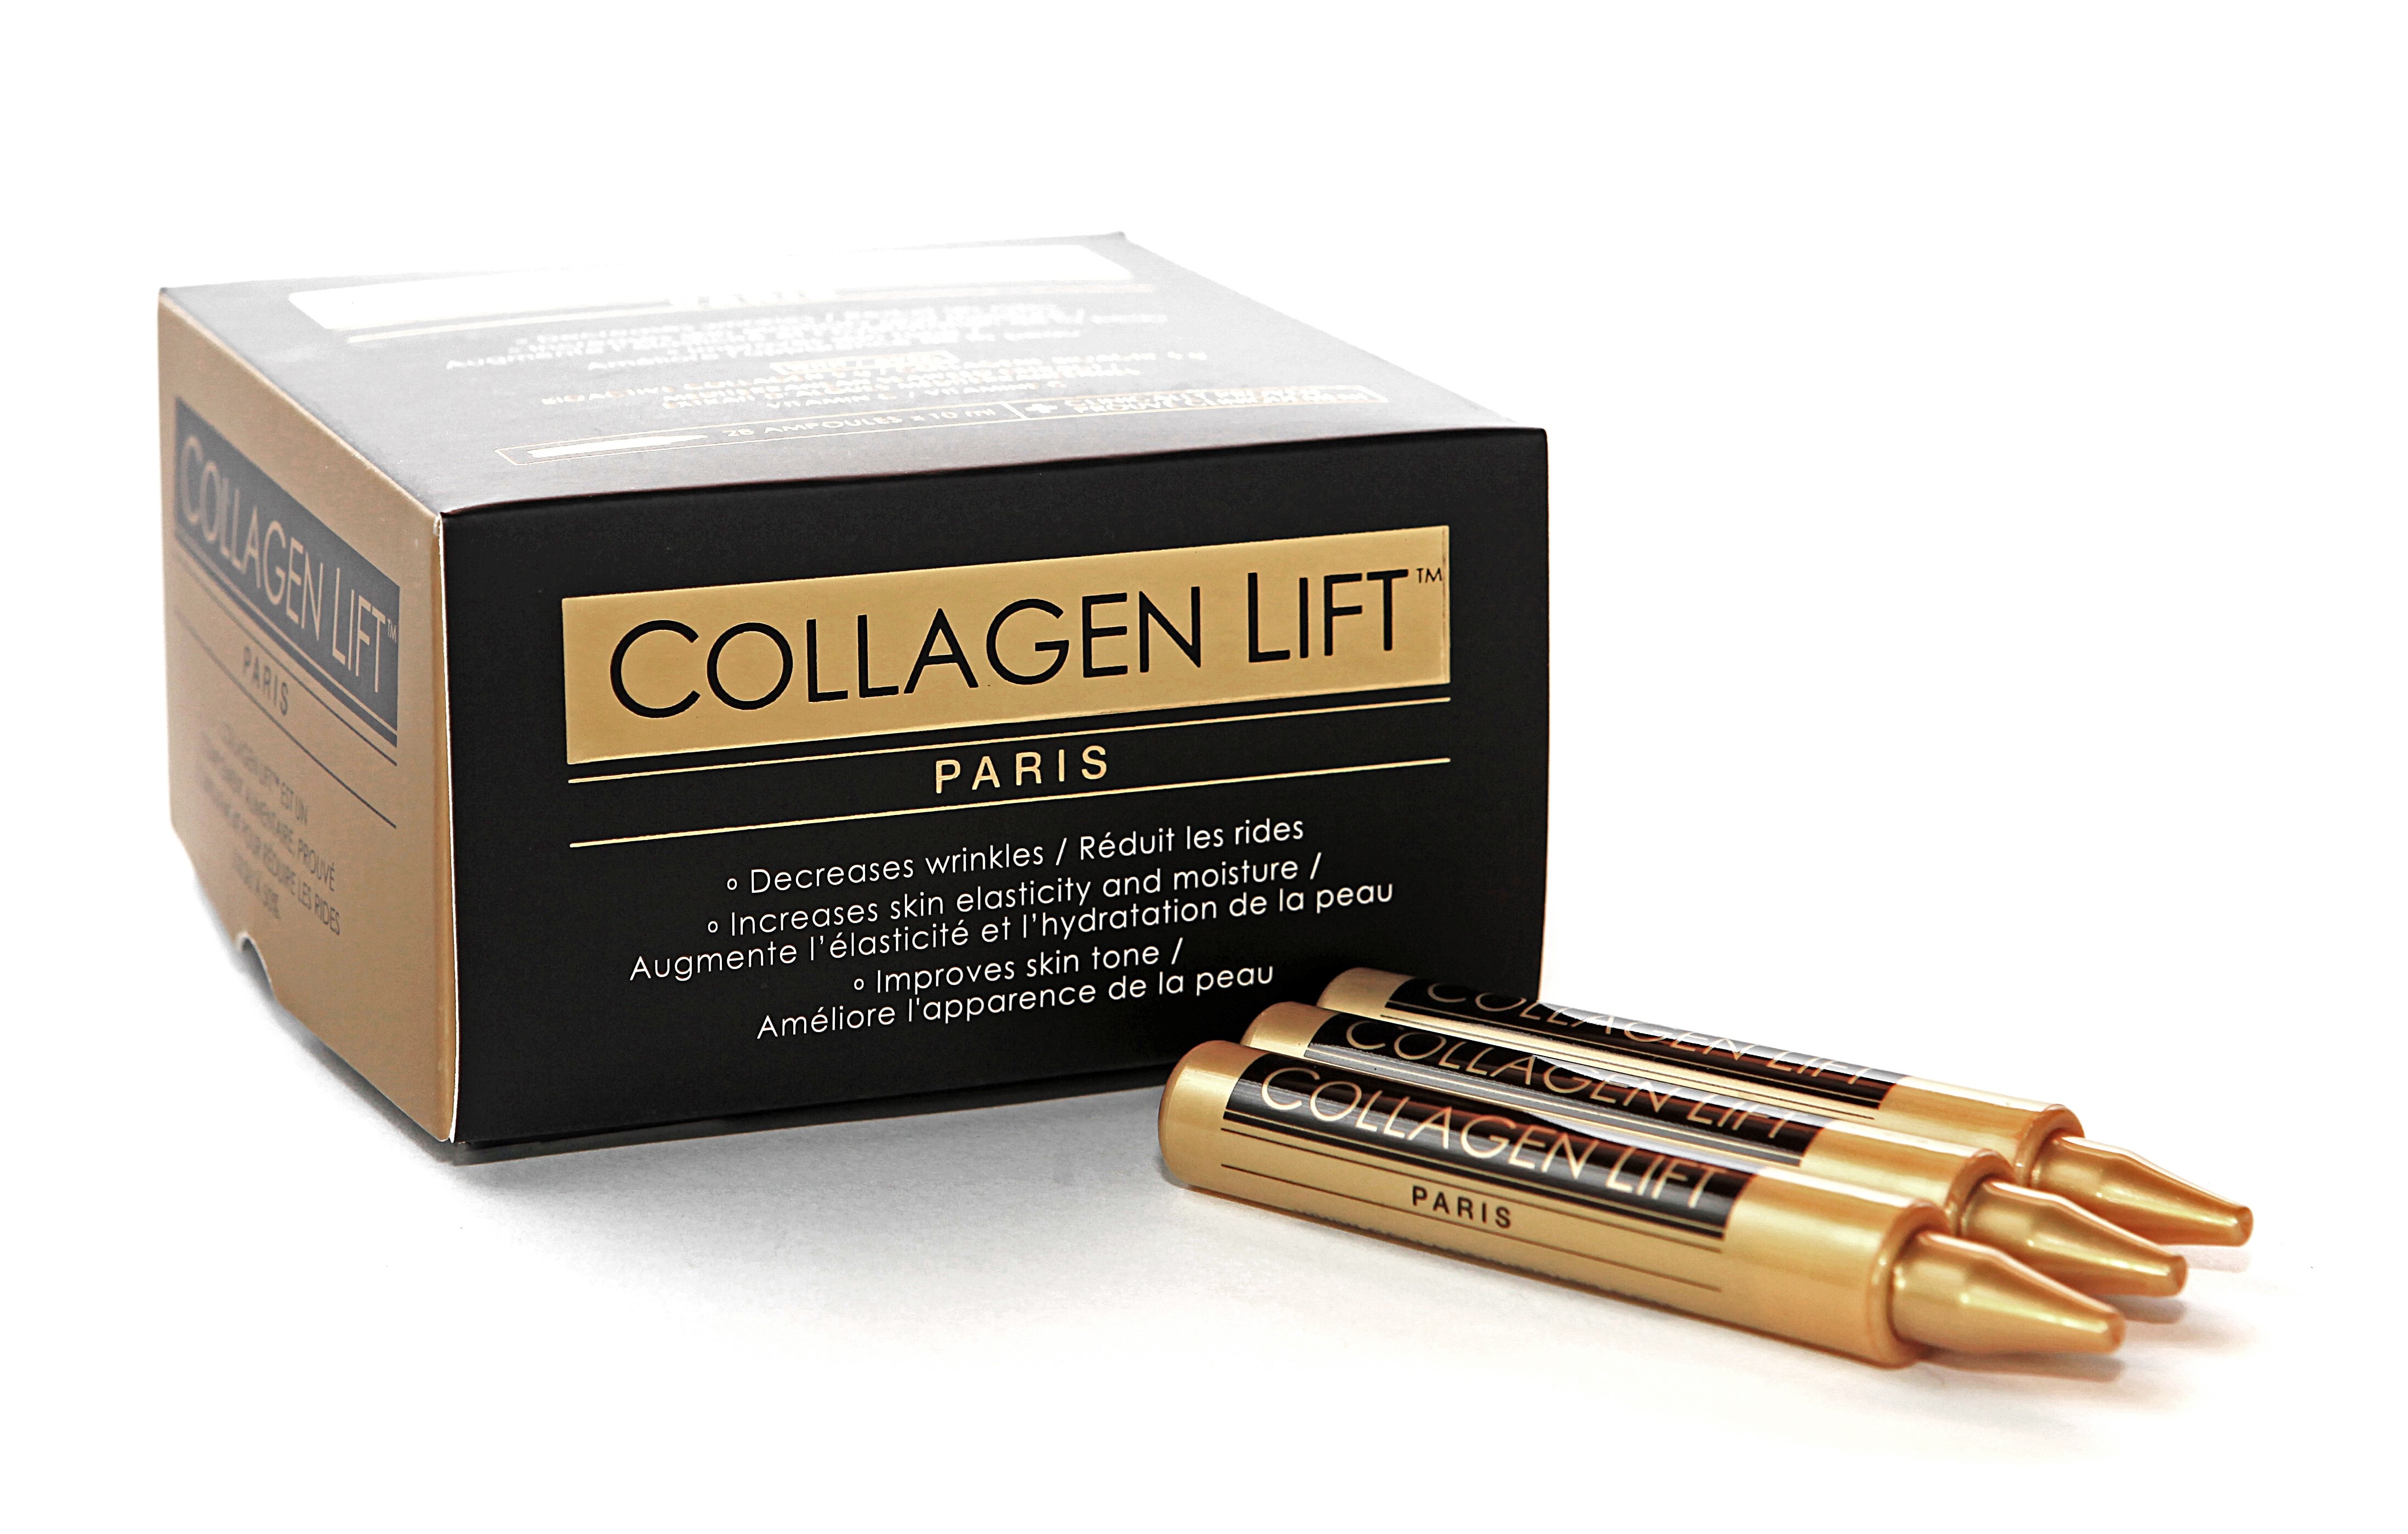 COLLAGEN LIFT™ PARIS IS A DRINKABLE COLLAGEN SUPPLEMENT THAT IS CLINICALLY PROVEN TO REDUCE WRINKLES BY UP TO 50%. MADE IN FRANCE, ITS FORMULA CONTAINS A POWERFUL COMBINATION OF VERISOL® BIOACTIVE COLLAGEN, ULVA MEDITERRANEA SEAWEED (ULVALINE®, HARVESTED IN THE SOUTH OF FRANCE) AND VITAMIN C.